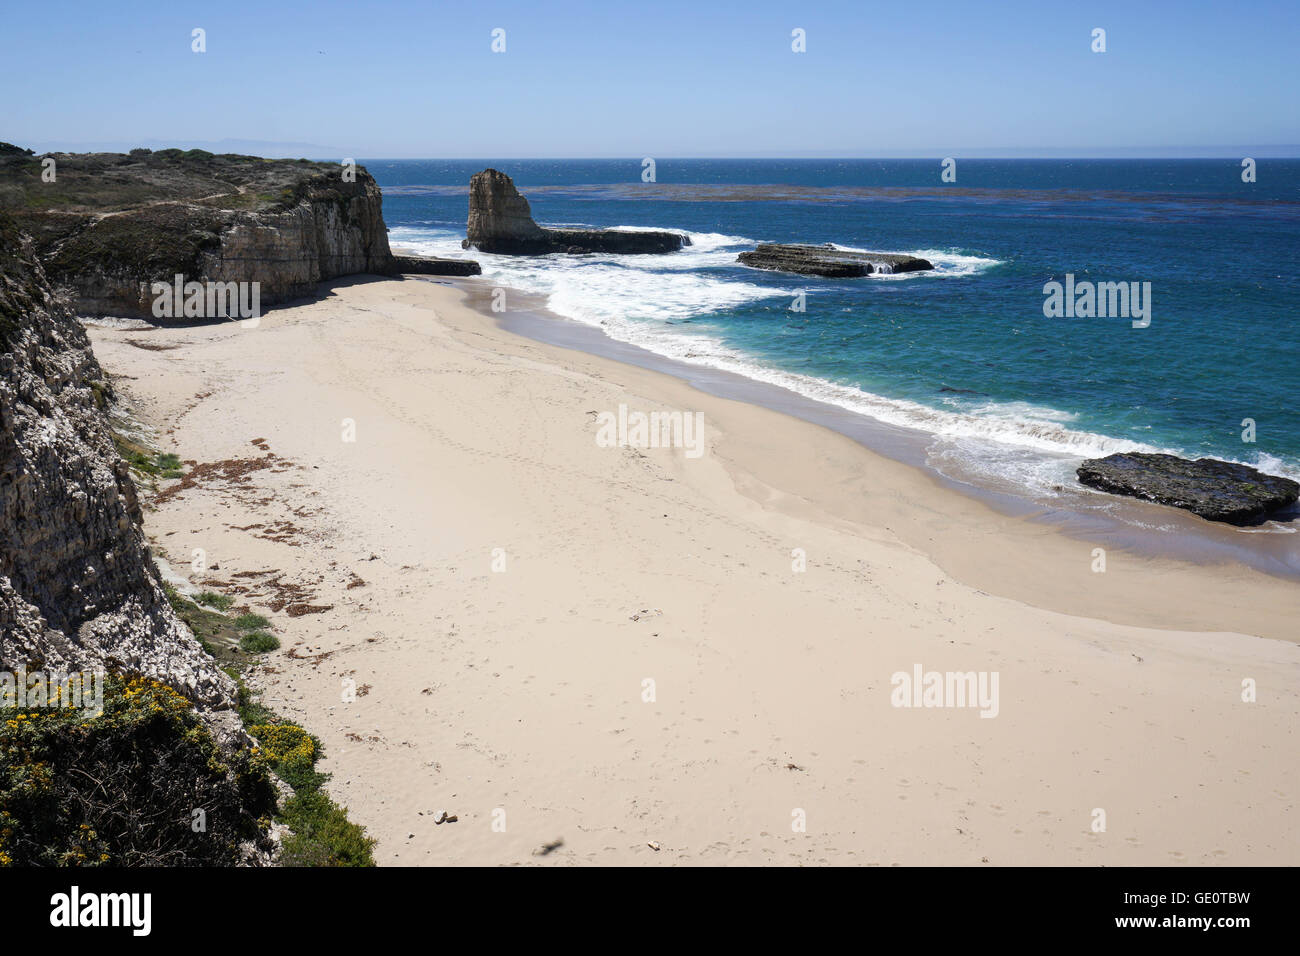 Beach and cliffs on the Pacific Coast, California Stock Photo